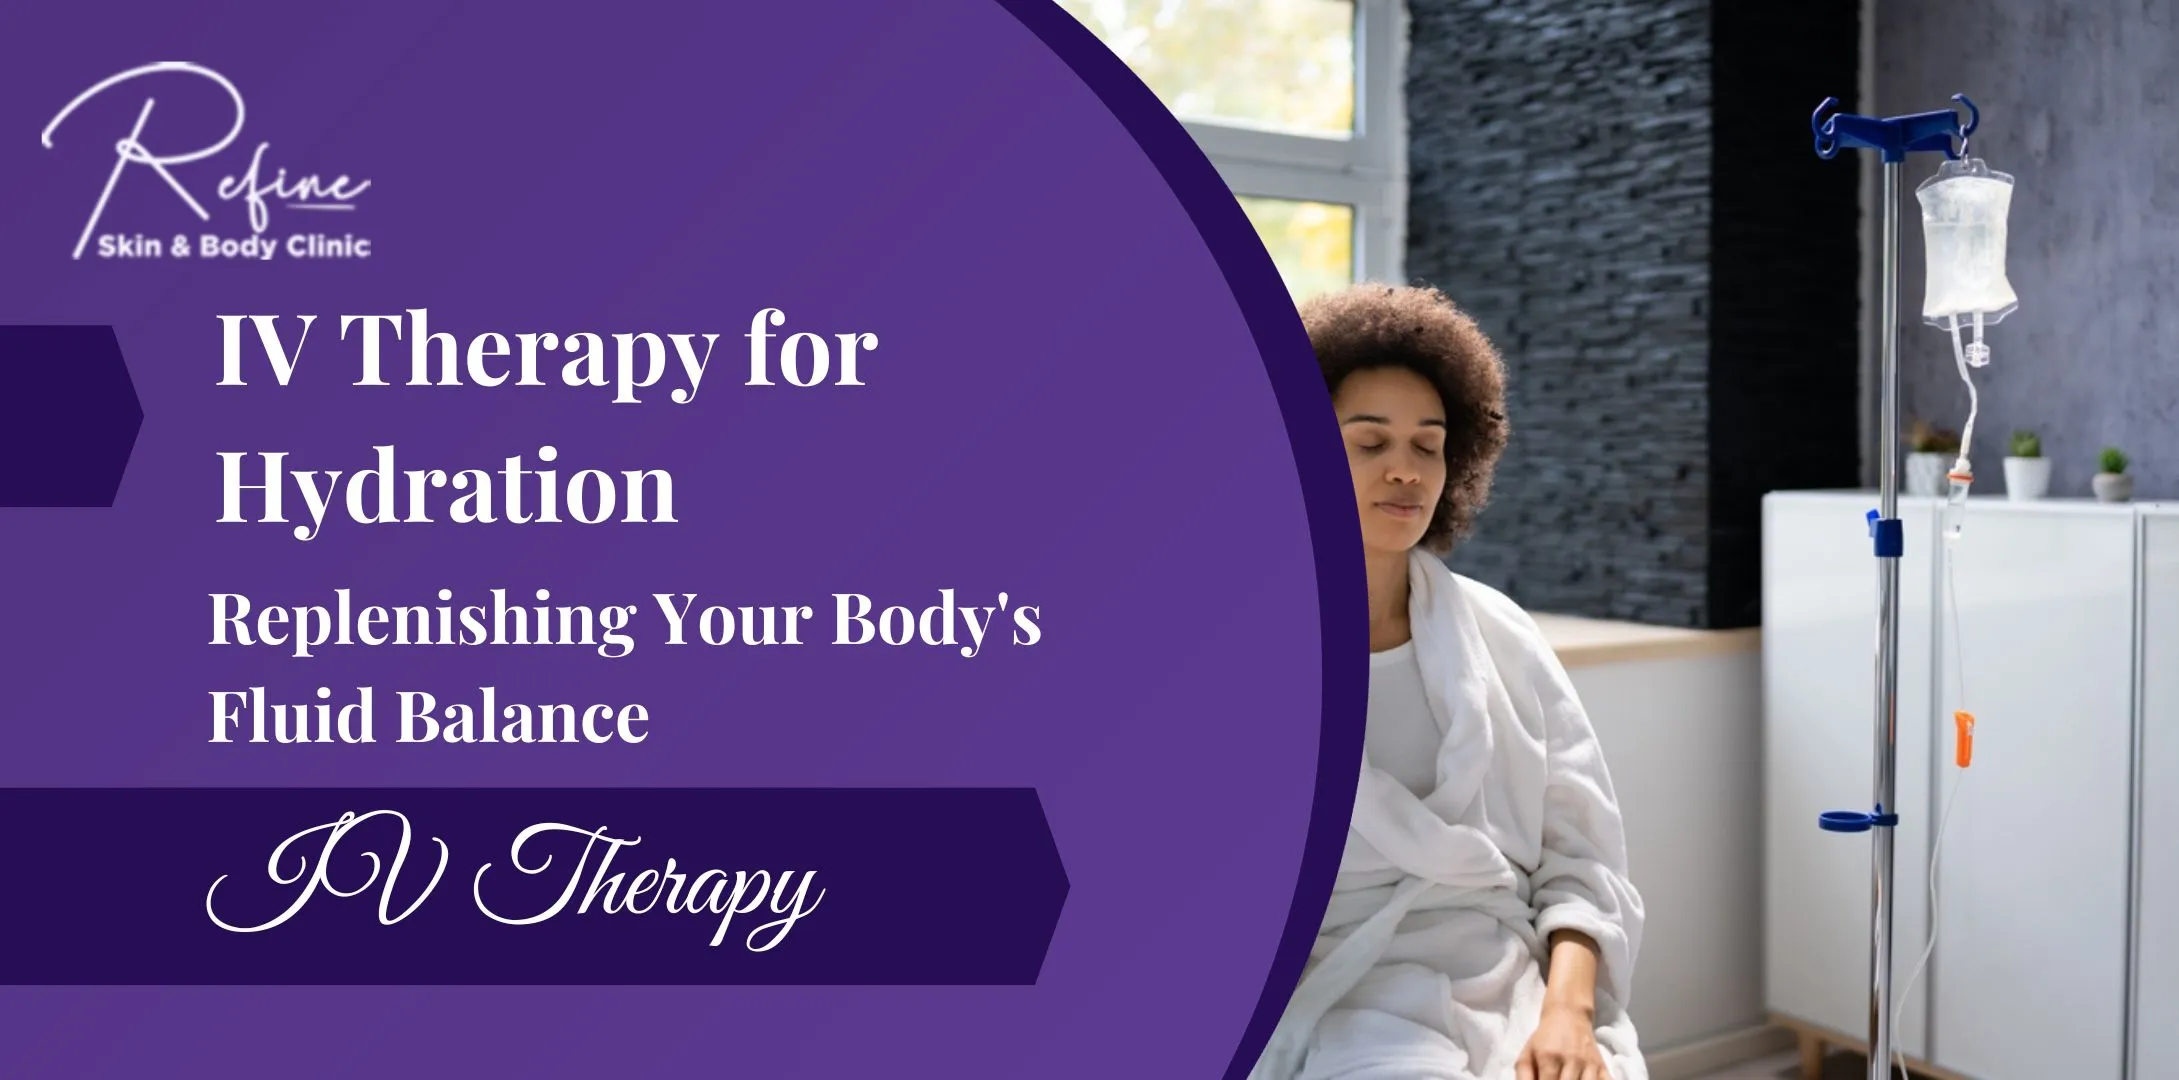 IV Therapy for Hydration: Replenishing Your Body's Fluid Balance